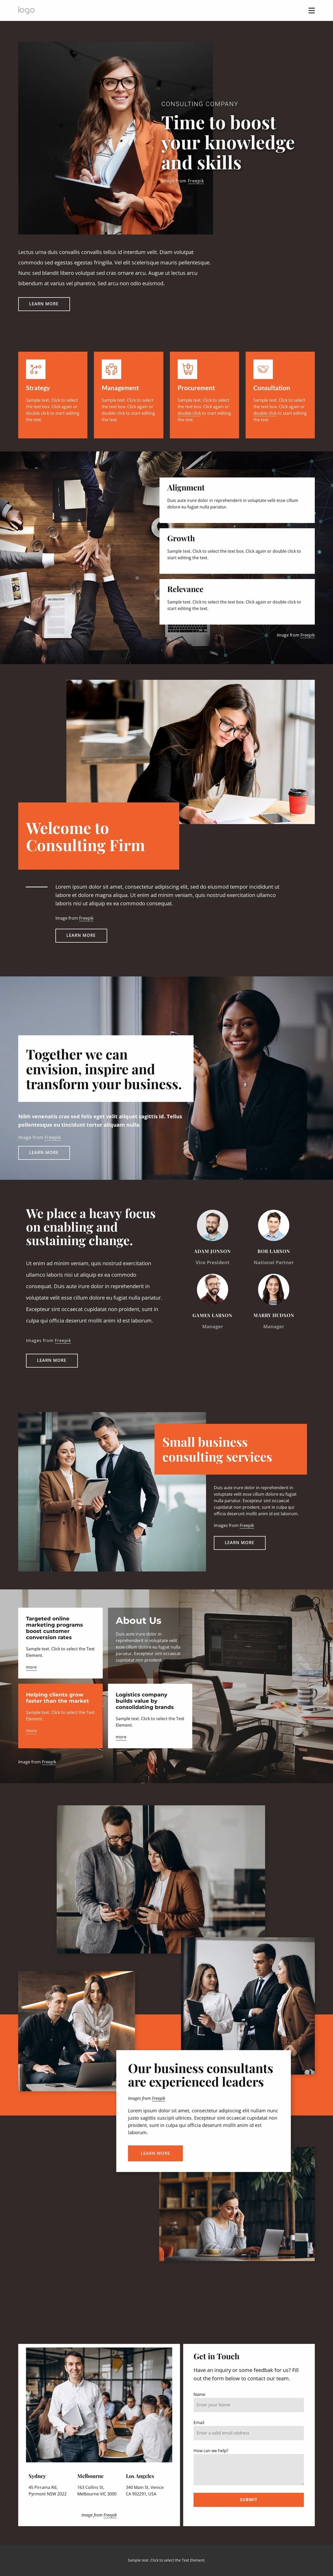 Рlan out your learning journey Website Builder Templates